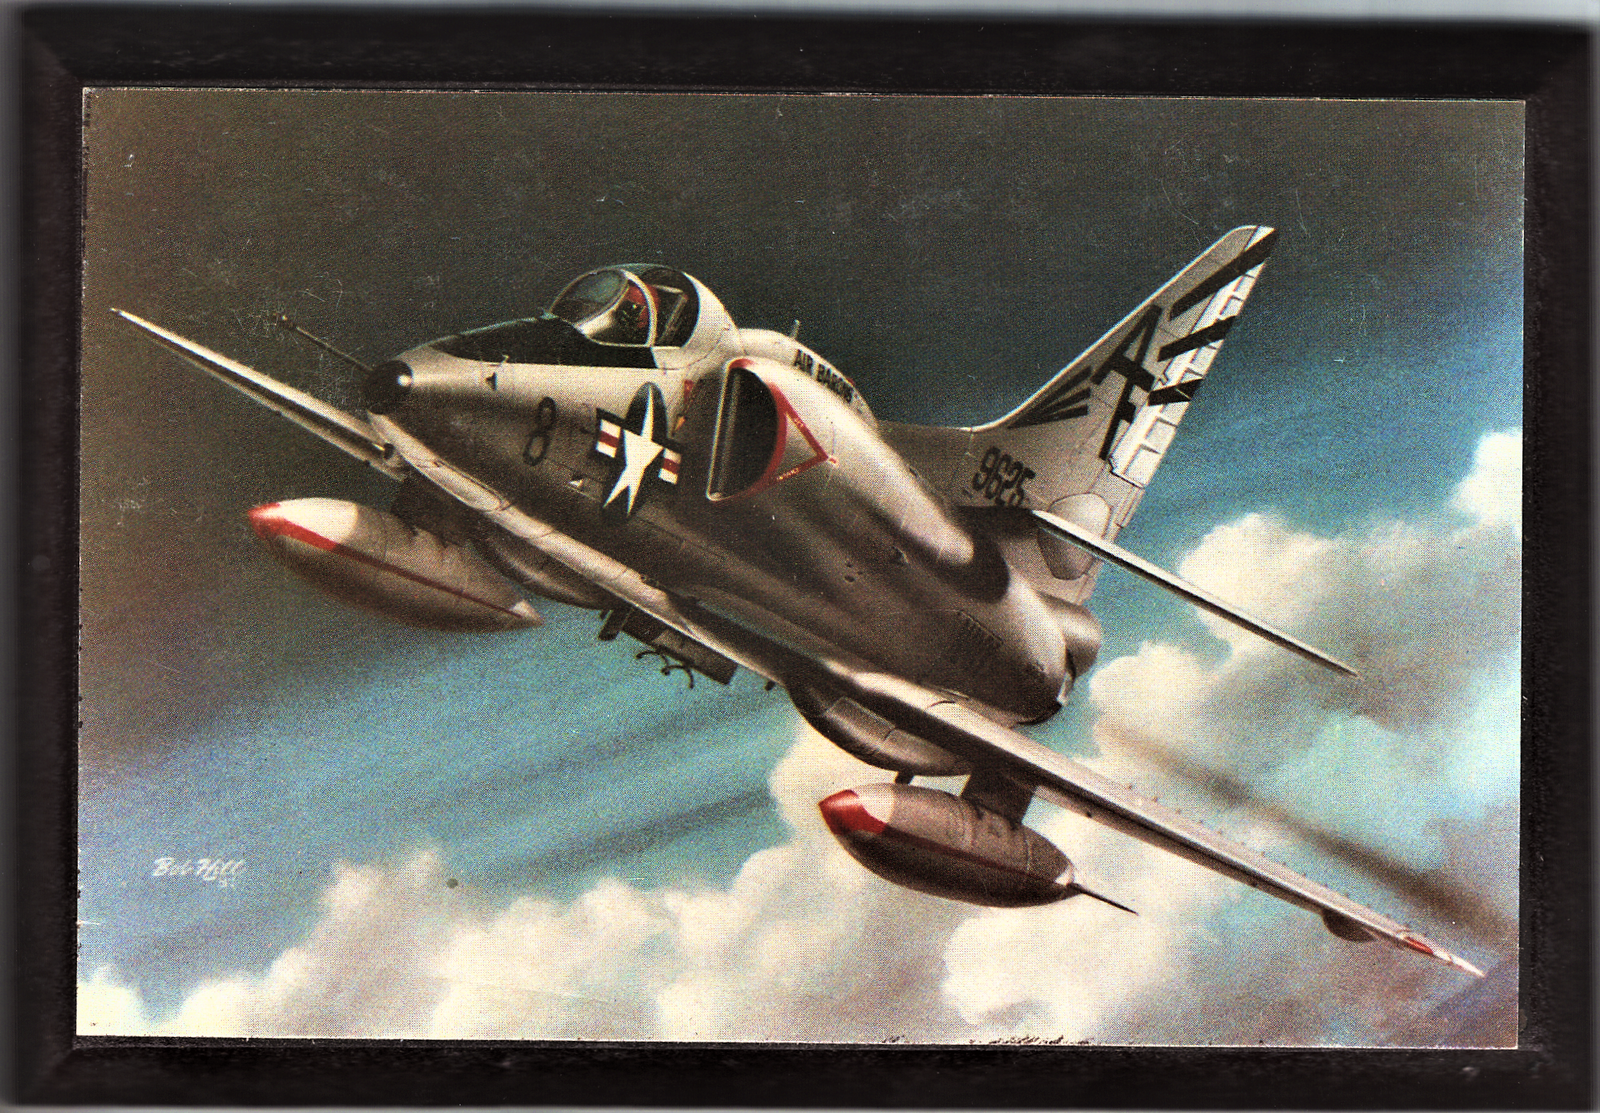 Primary image for 4" X 6" Wooden Plaque with a Print of a McDonnell Douglas A-4 (SKYHAWK)